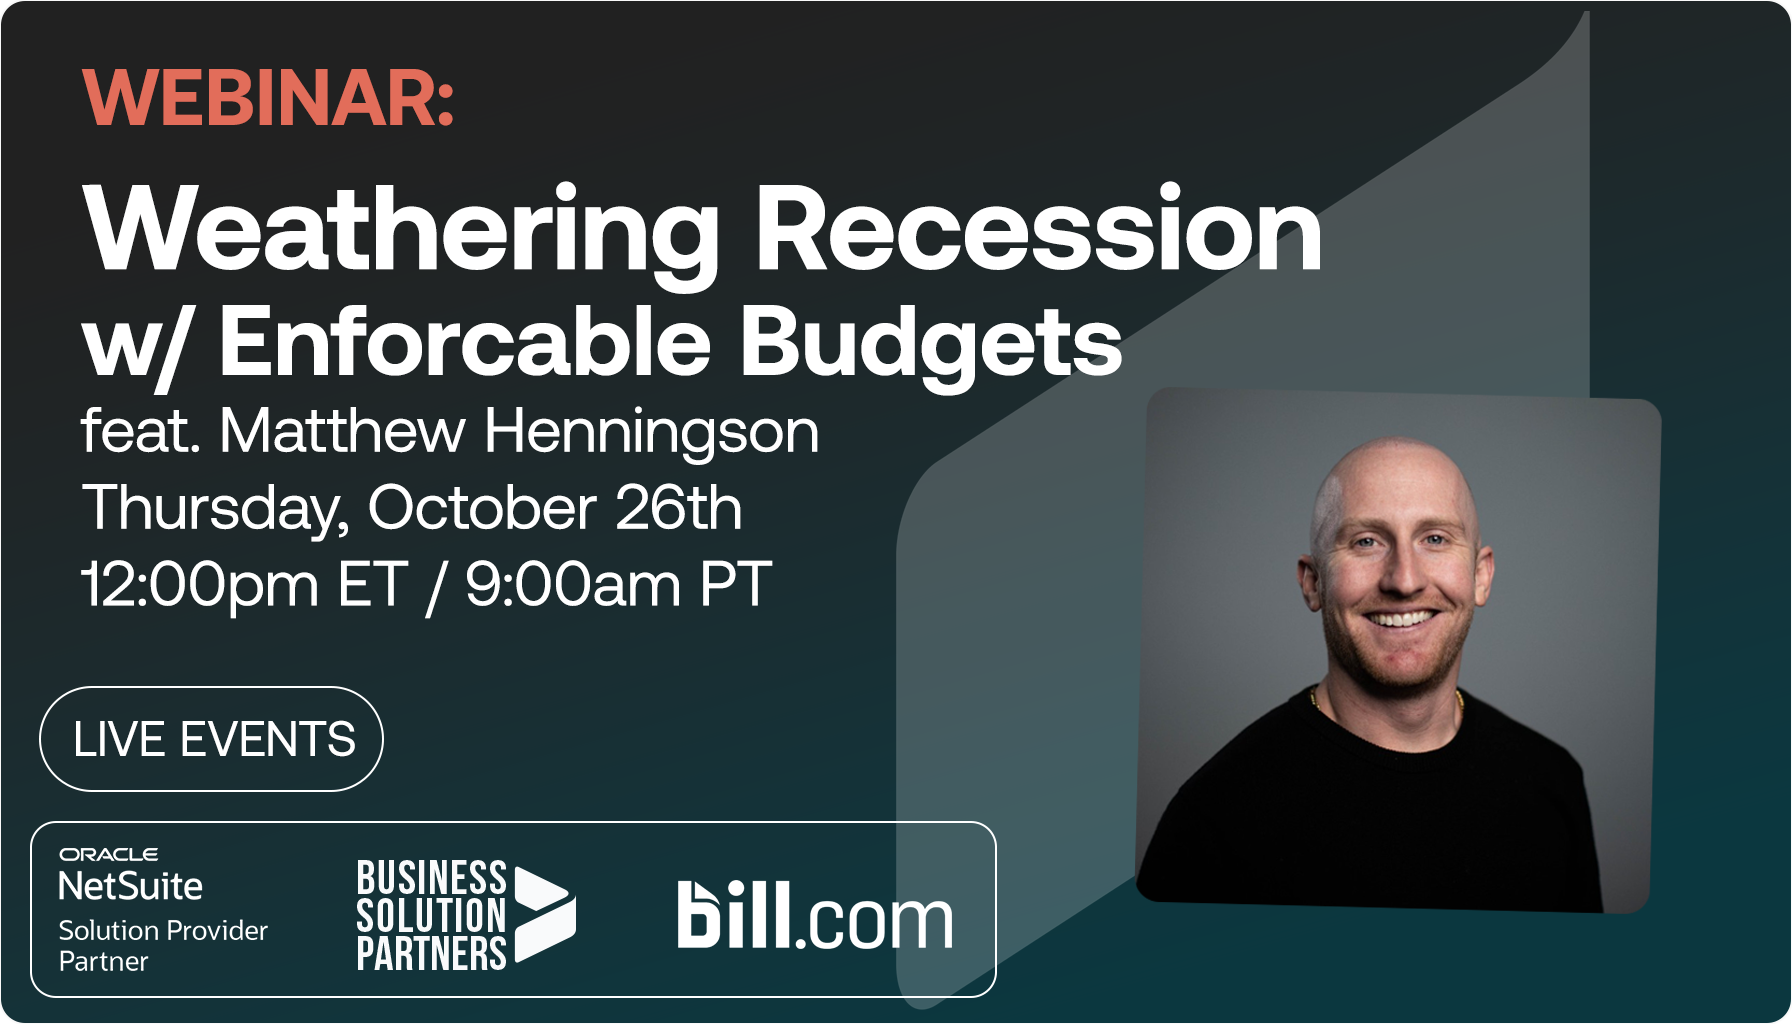 Webinar: Weathering Recession with Enforceable Budgets